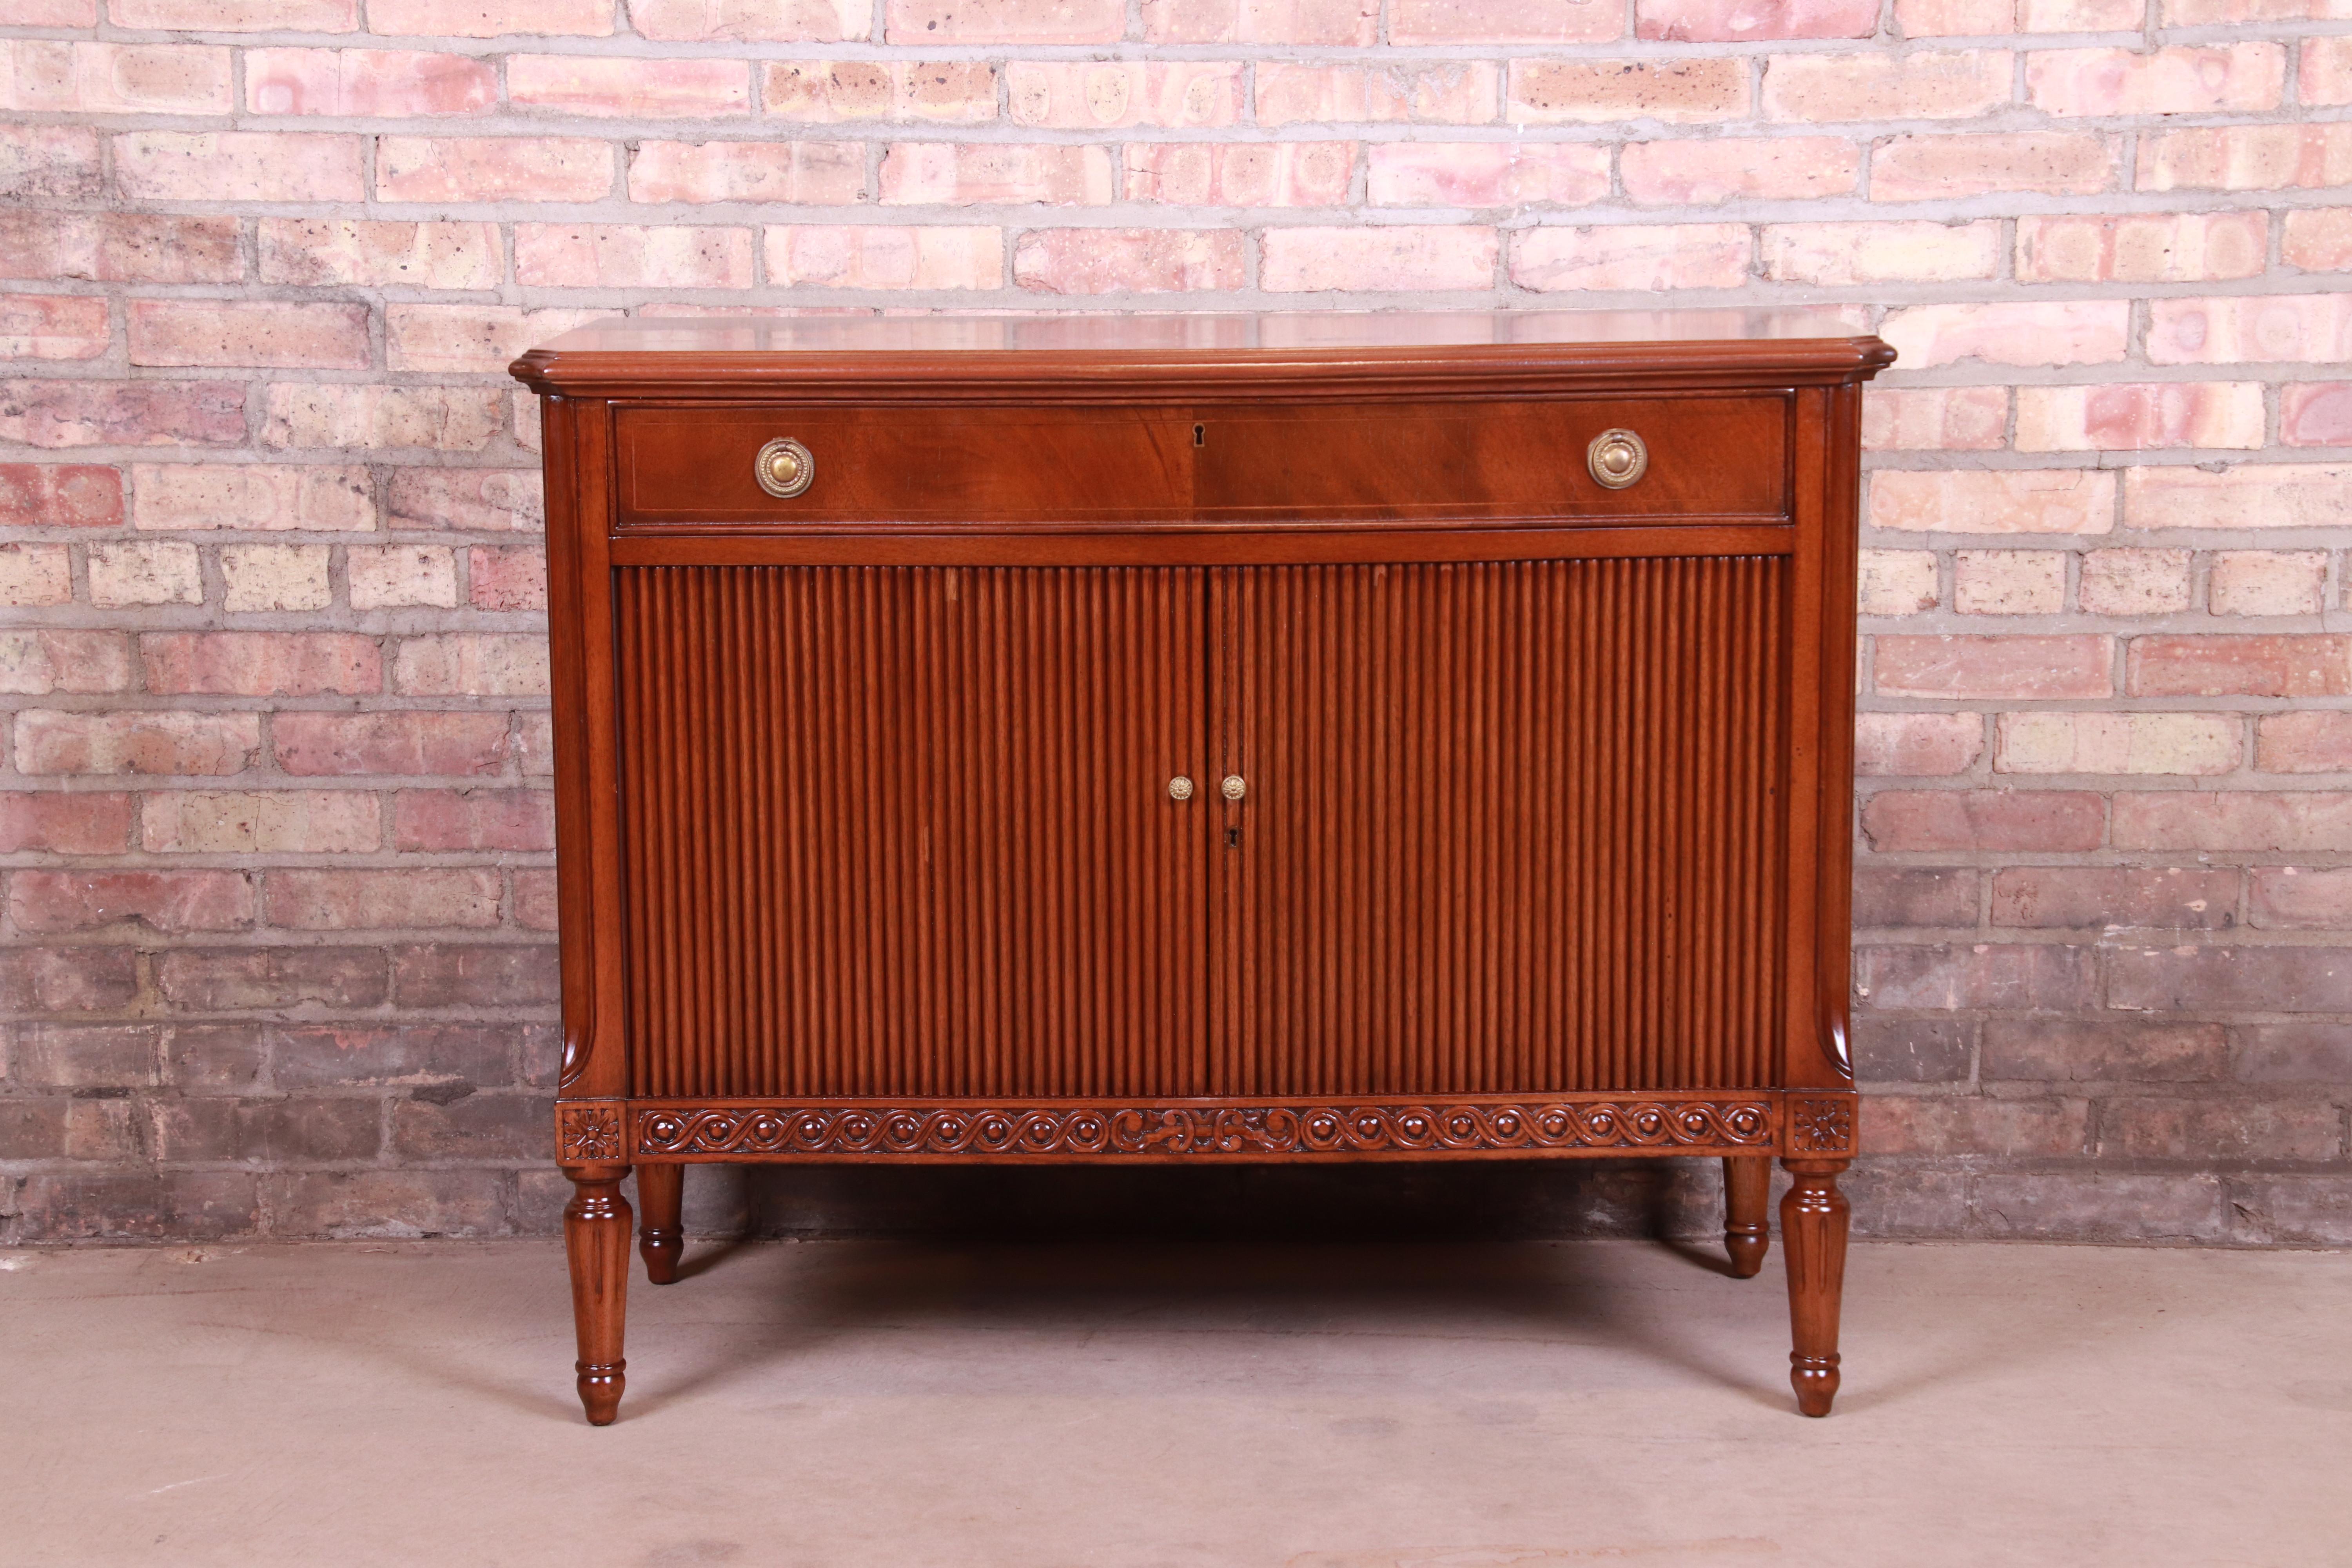 An exceptional Italian Regency style compact credenza, server, or commode,

Circa 1940s

Mahogany, with tambour door and original brass hardware.

Measures: 40